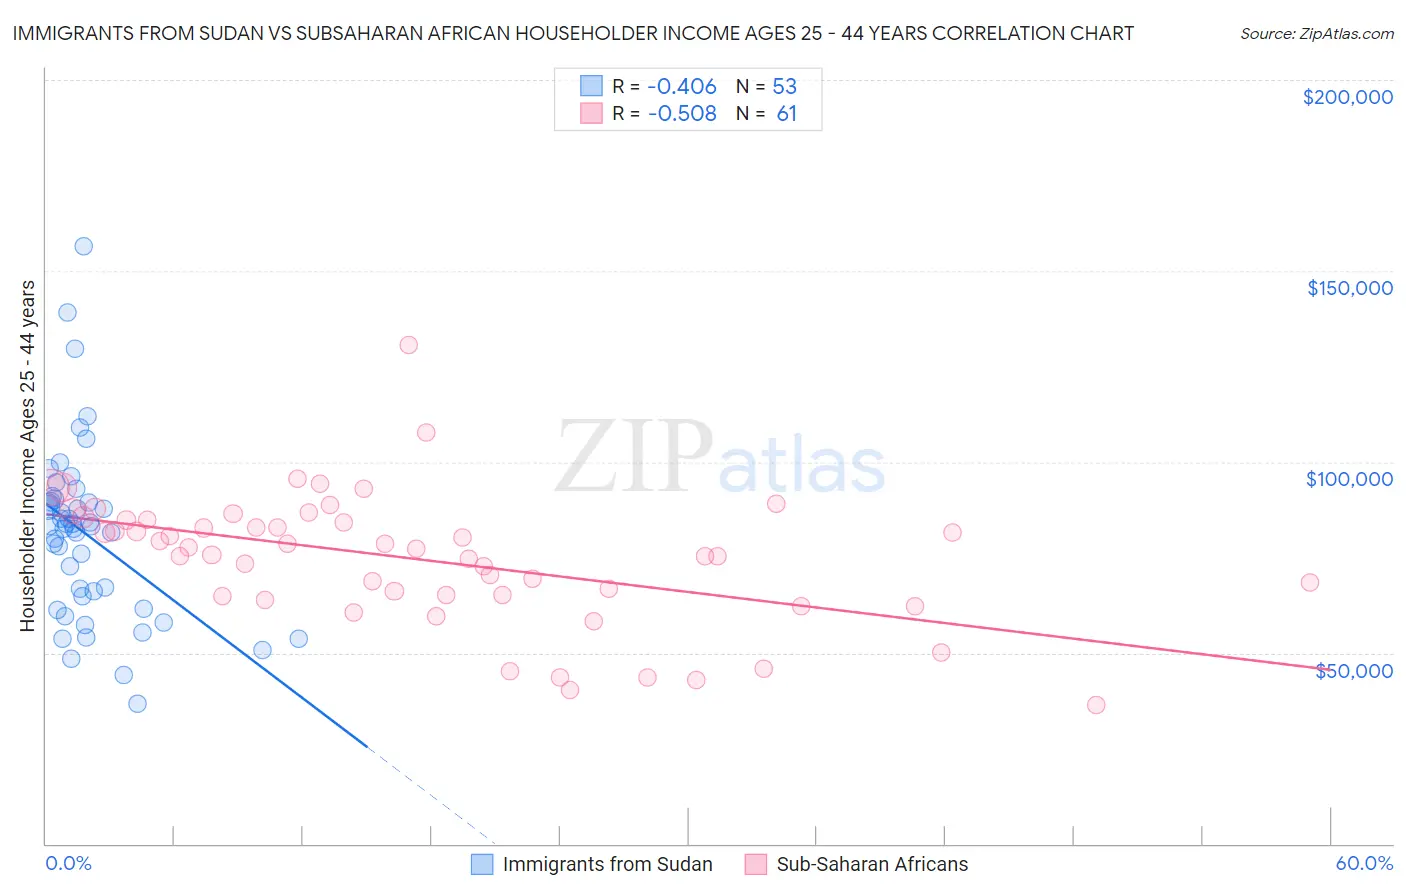 Immigrants from Sudan vs Subsaharan African Householder Income Ages 25 - 44 years